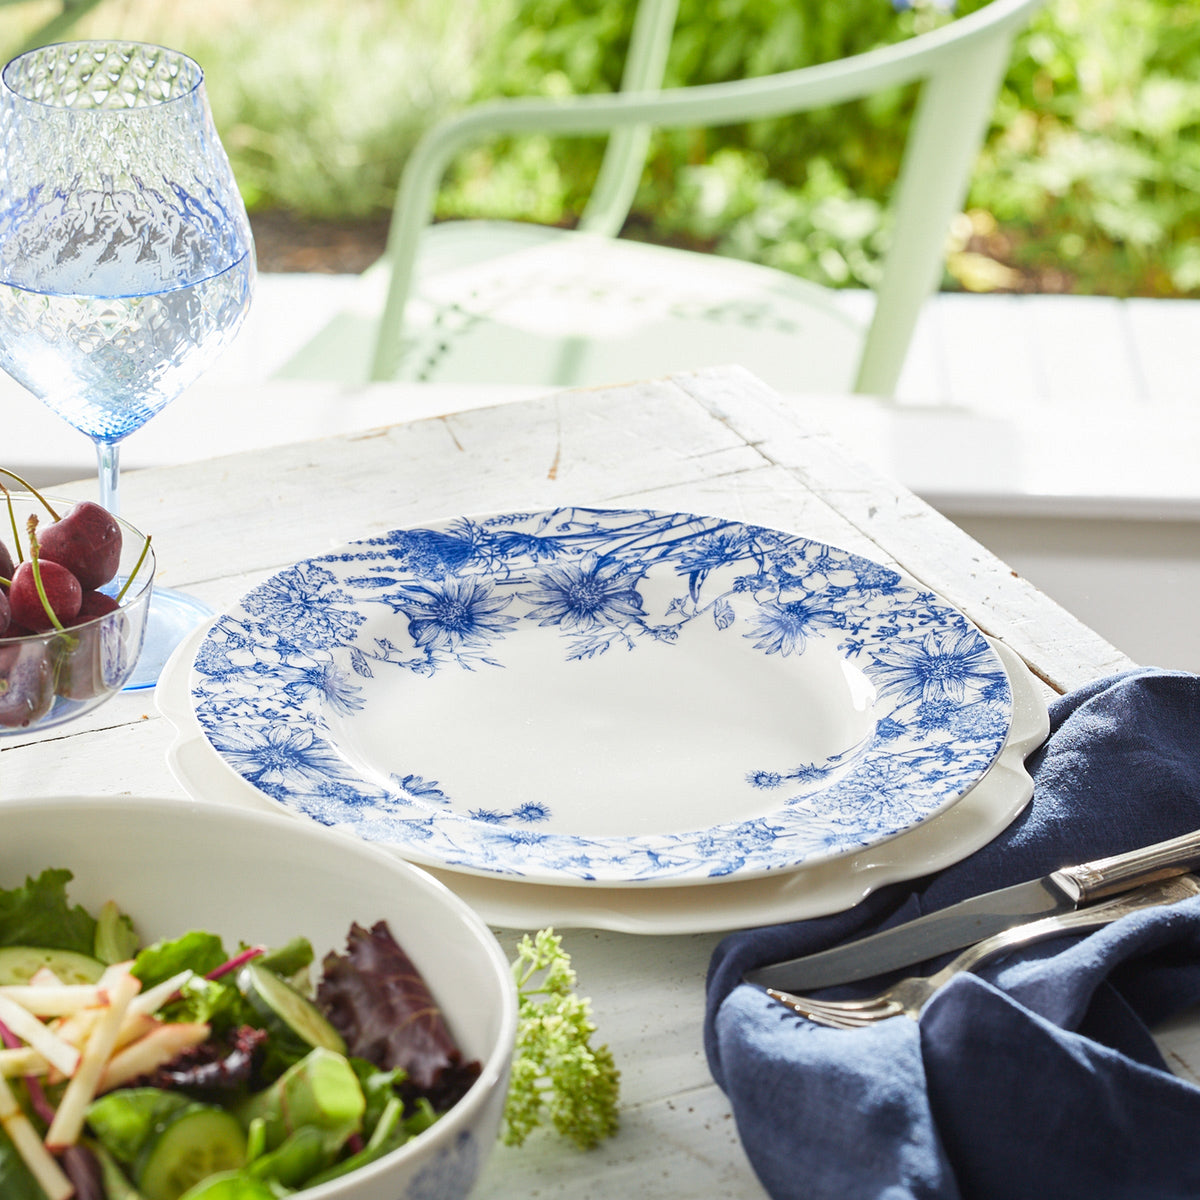 A Summer Blues Rimmed Dinner Plate by Caskata Artisanal Home with a floral pattern on a white table.